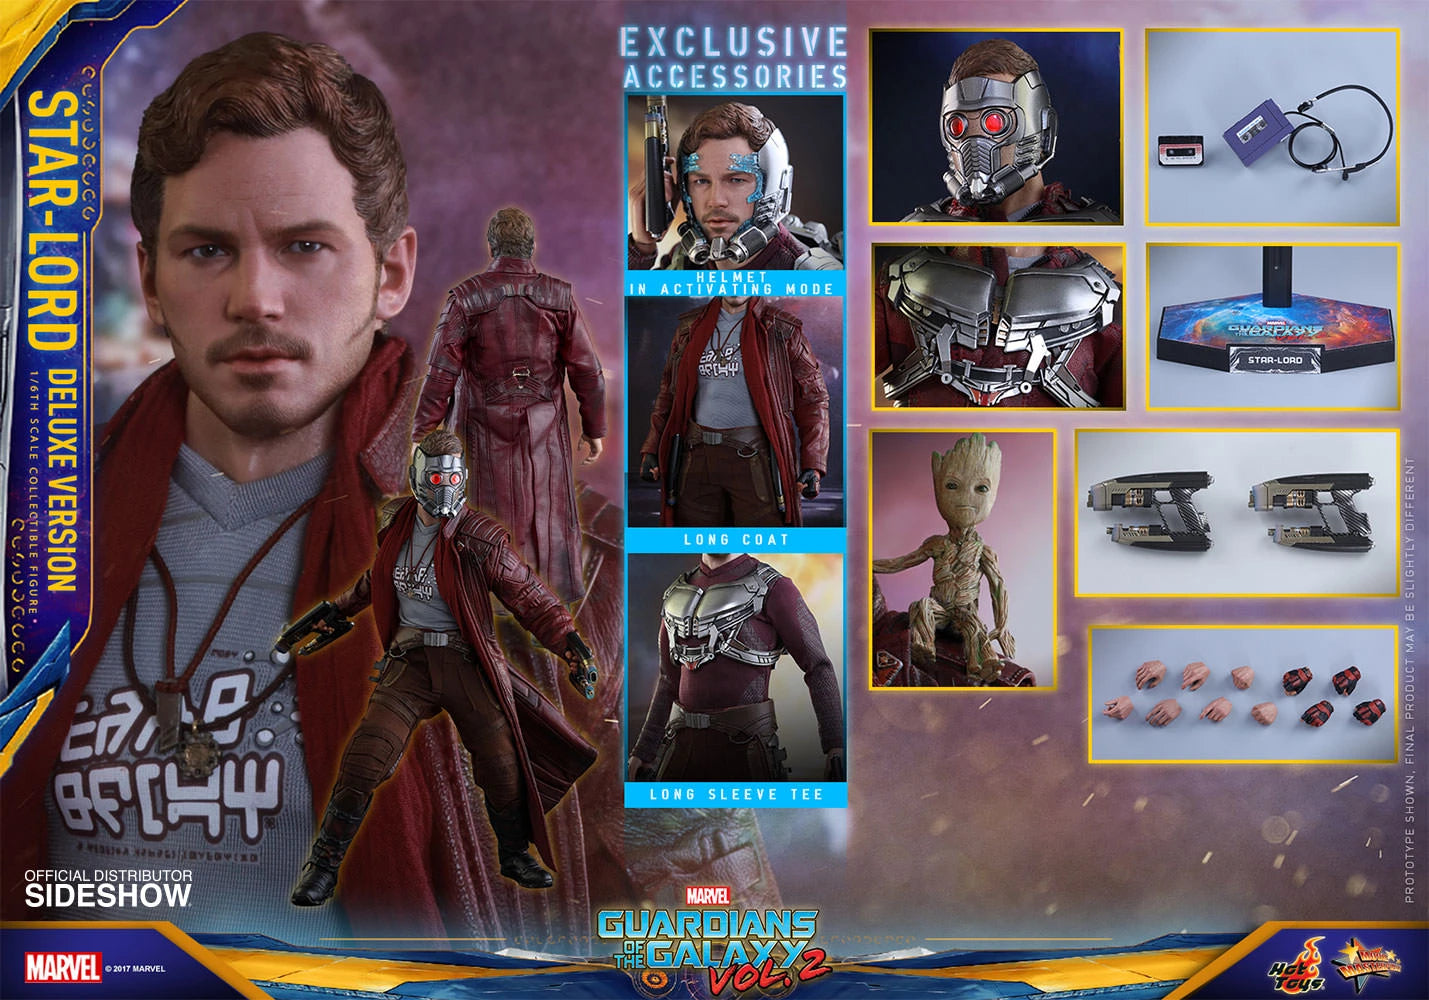 STAR-LORD Guardians of the Galaxy Vol 2 1/6 scale action figure by Hot Toys MMS421